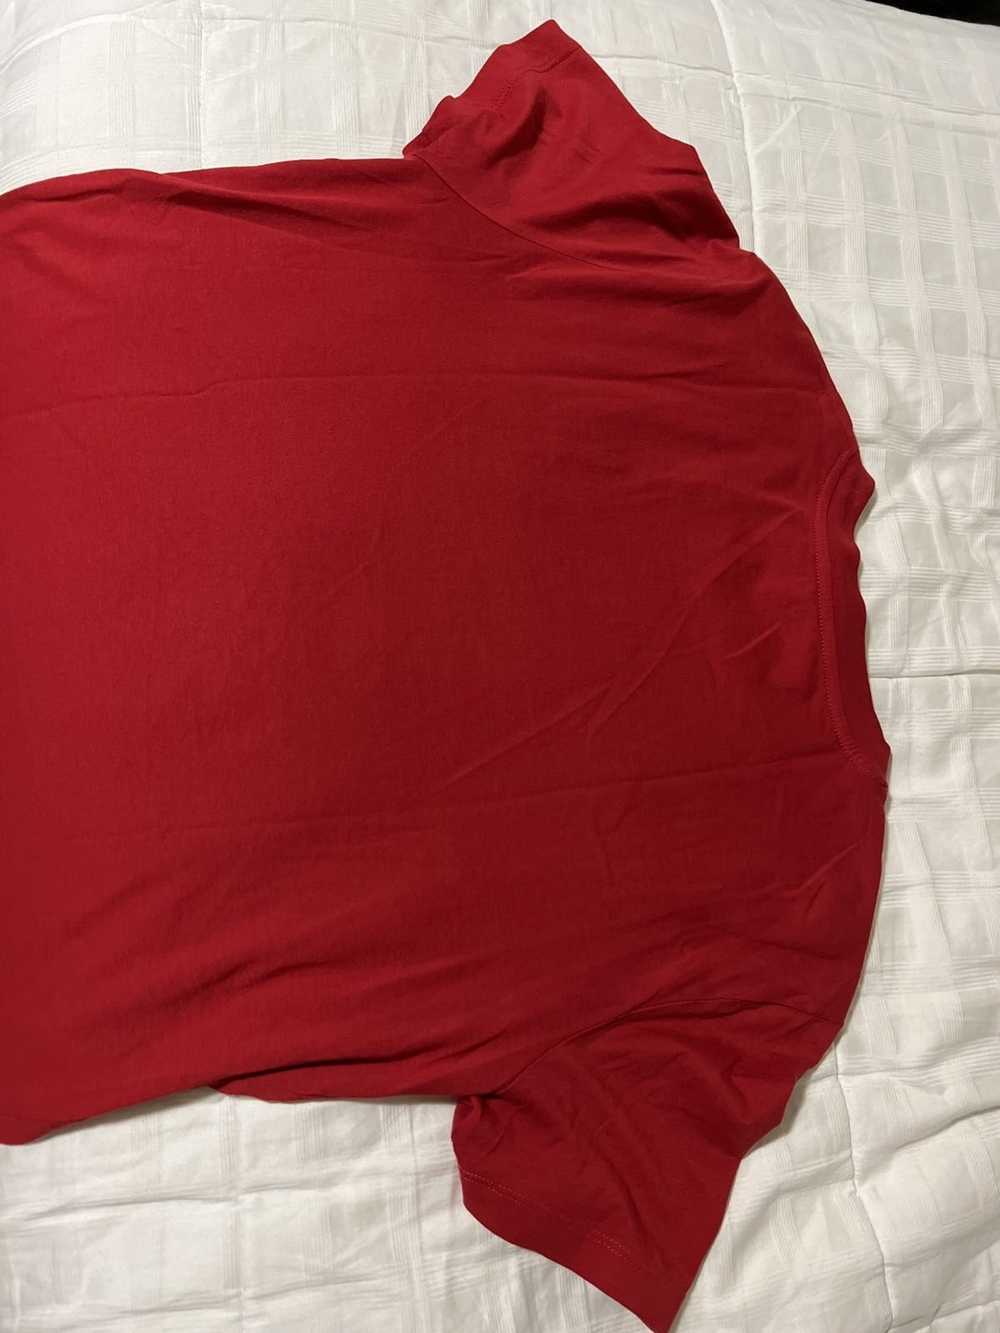 Alexander McQueen Red basic MCQ tee - image 5